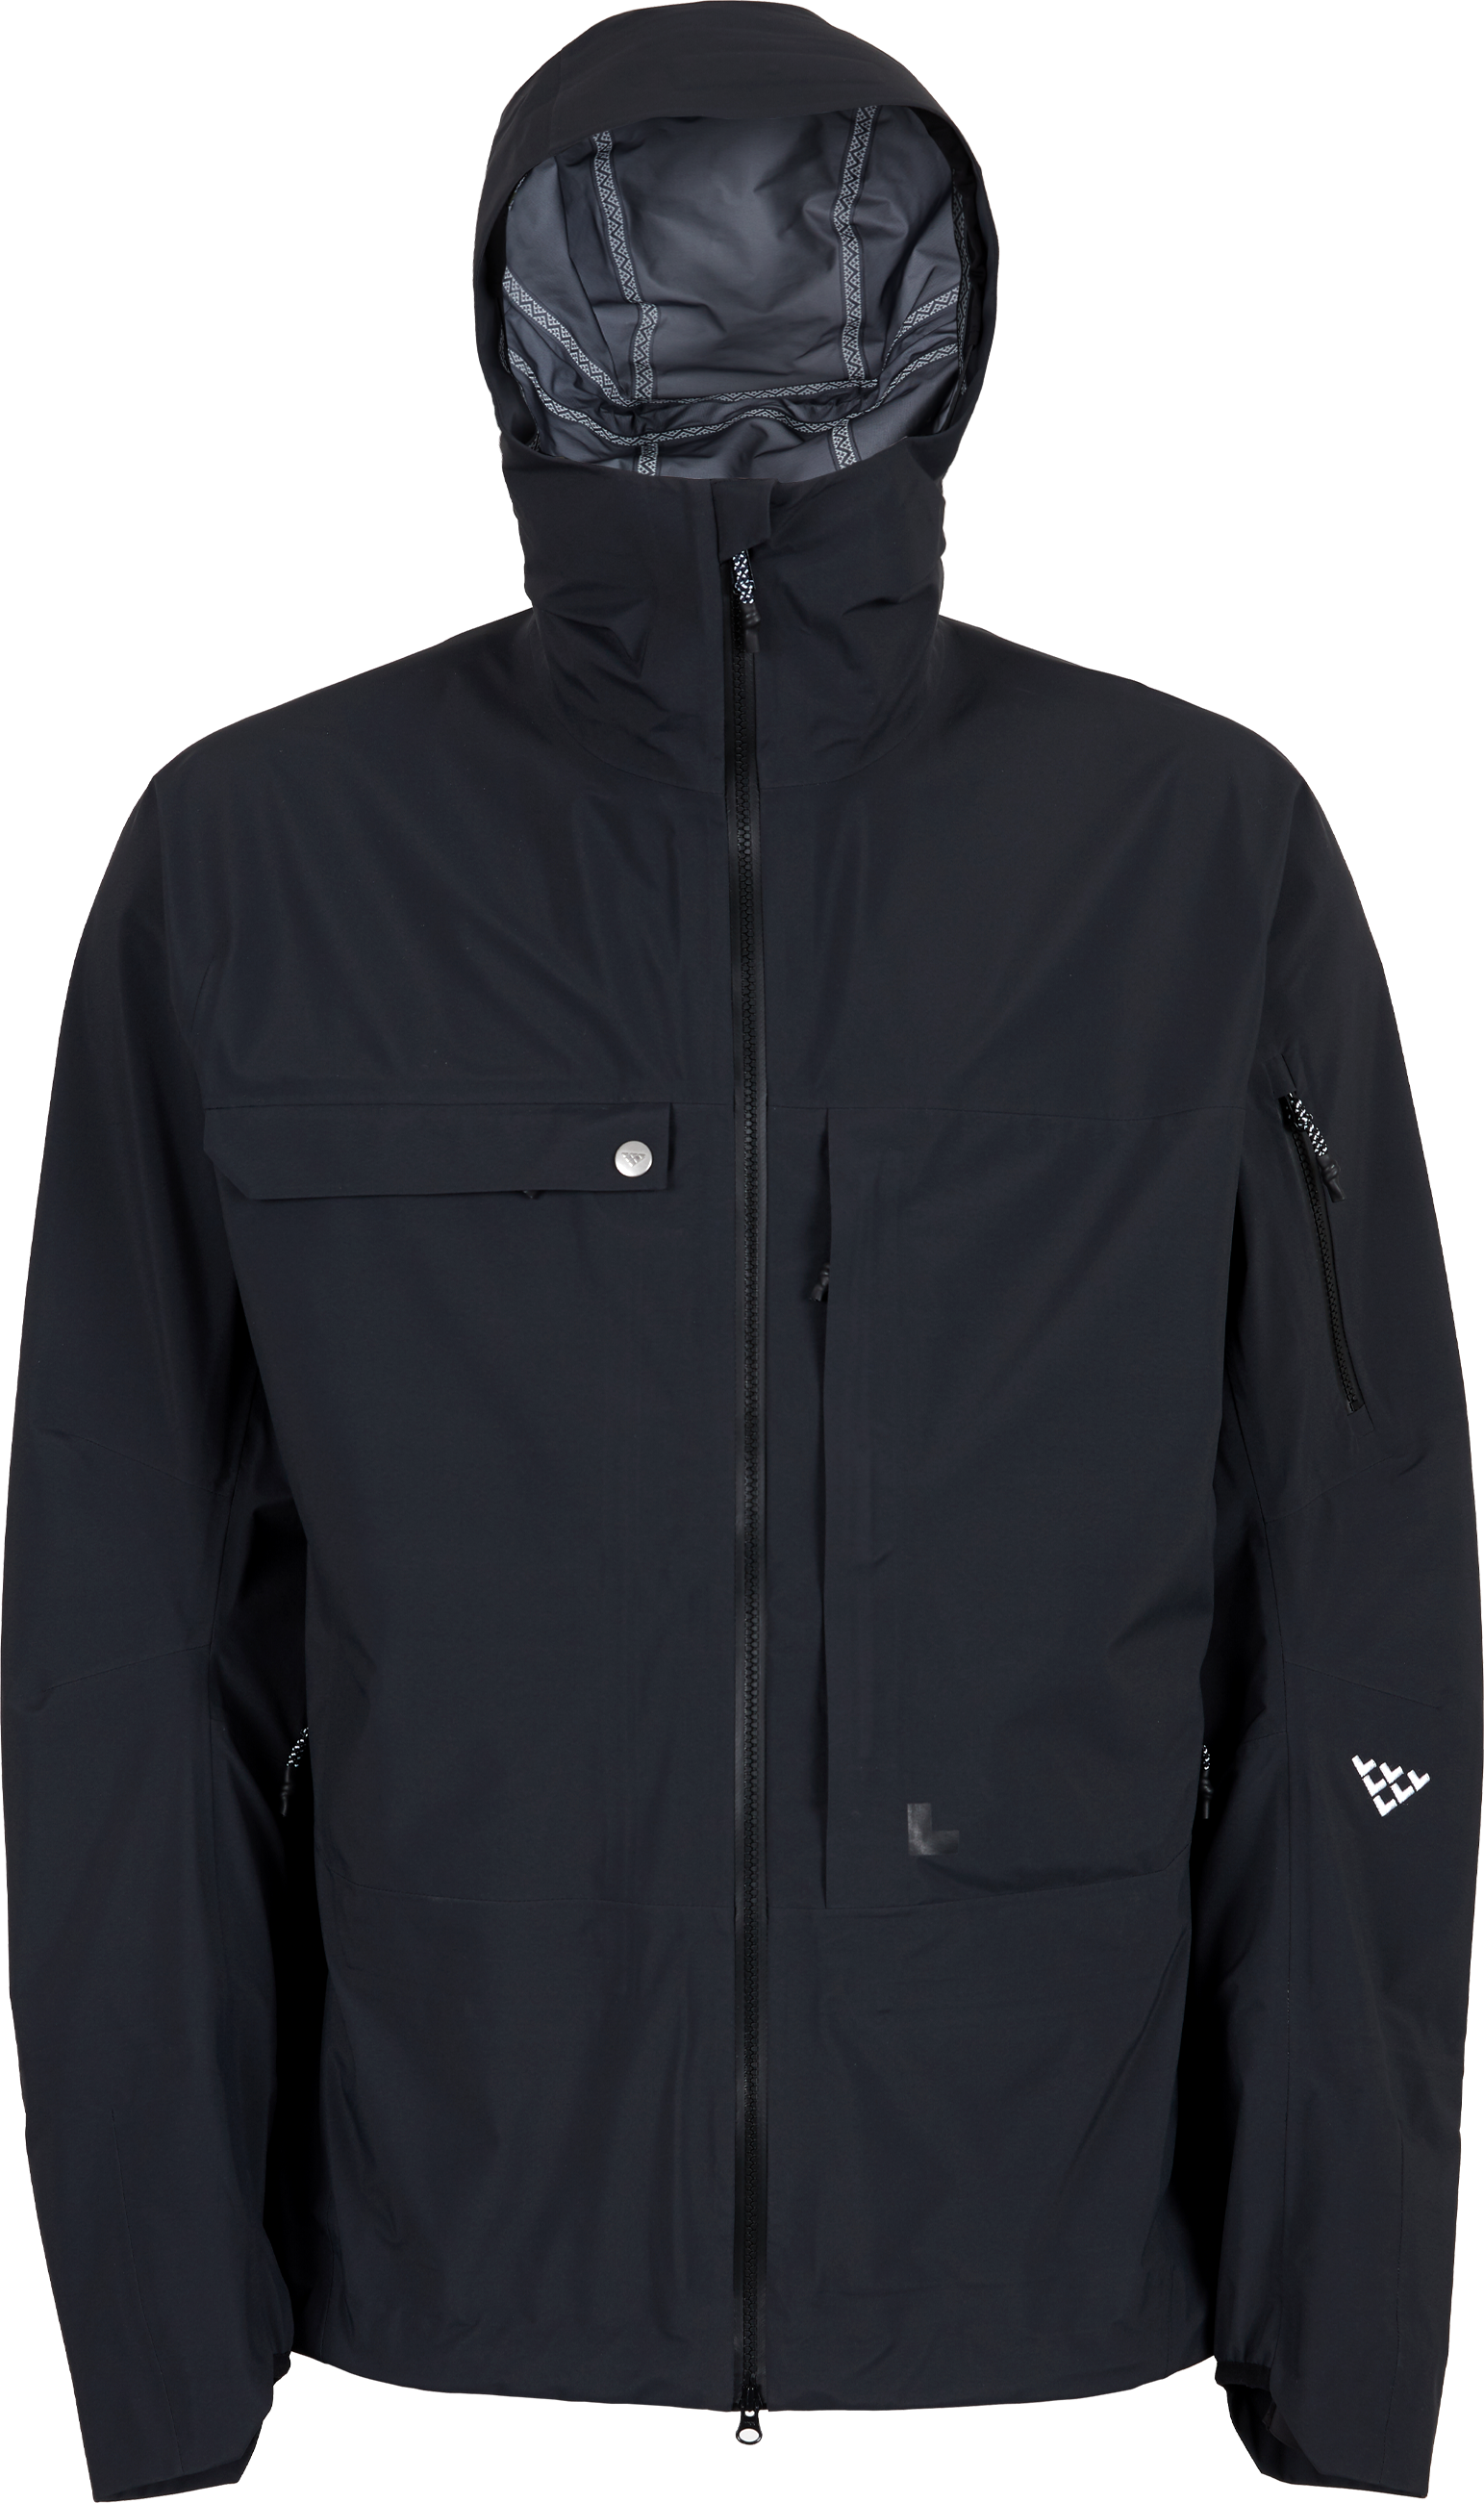 Black Crows Ventus 3l Gore Tex Light Jacket Men S Up To 43 Off W Free Shipping And Handling